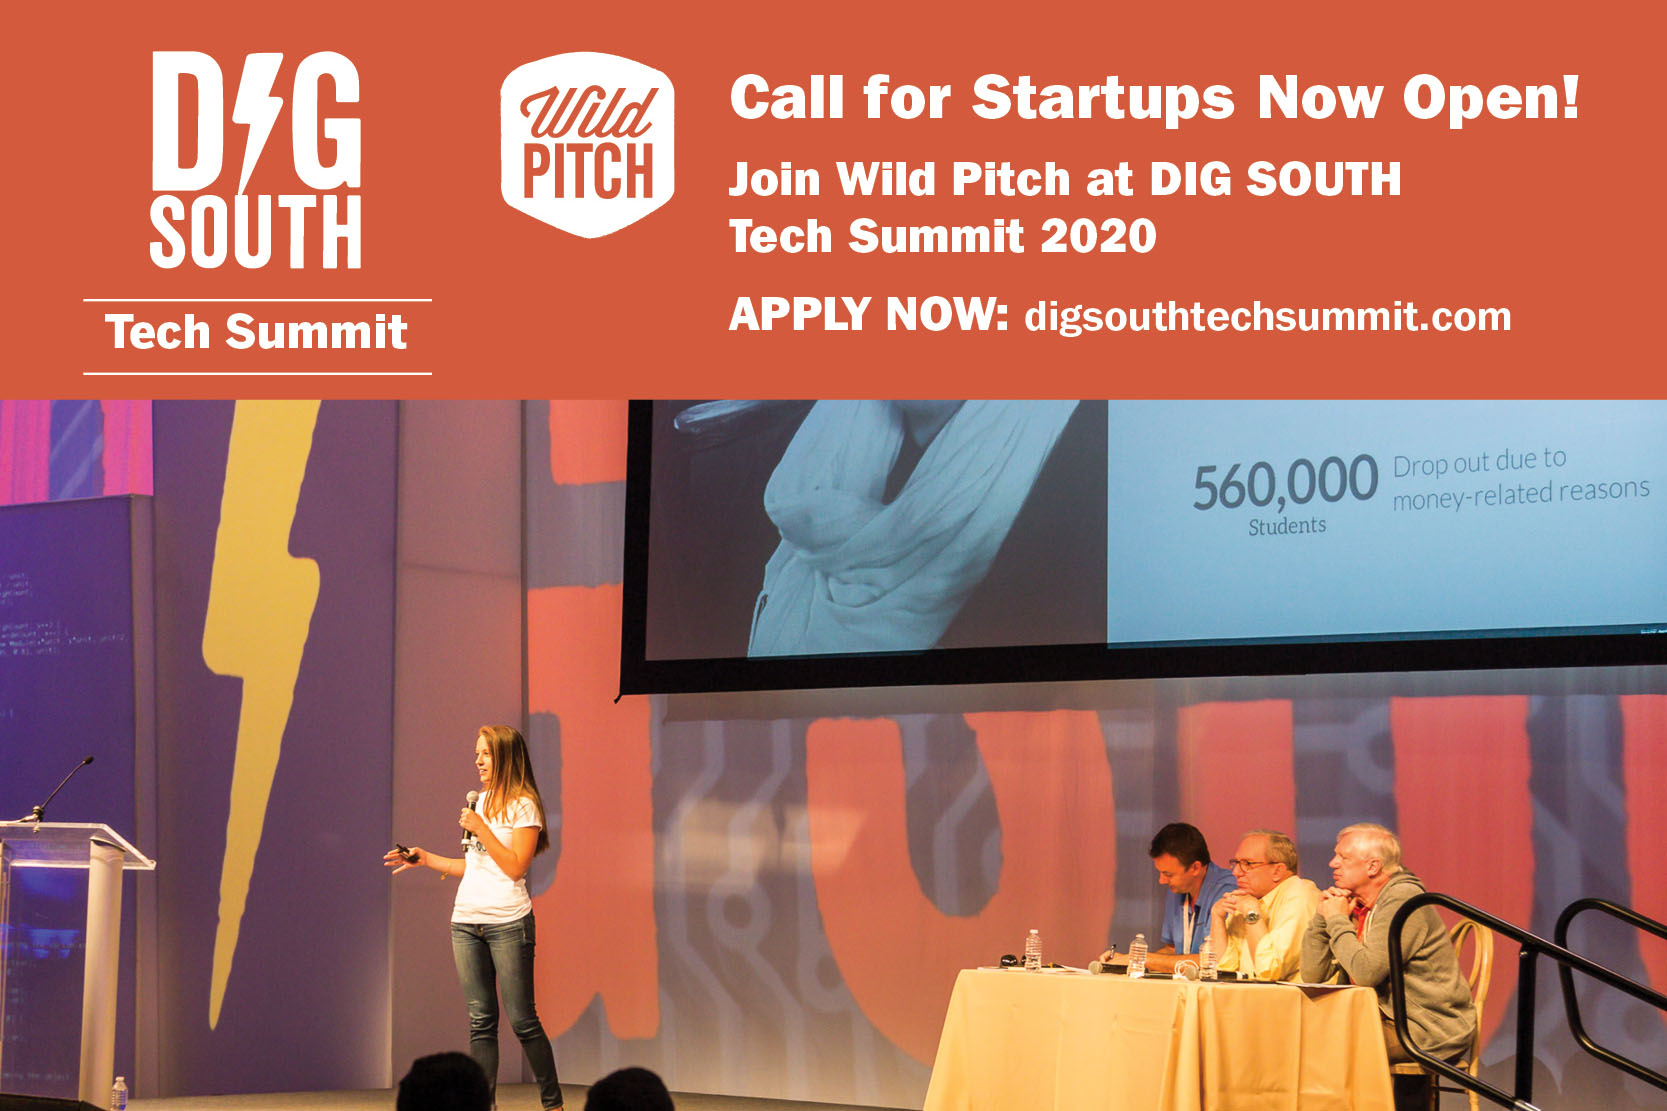 Call for Startups to Join DIG SOUTH Wild Pitch Open + Pensa (Austin), Motivo (ATL), Allstacks (RAL), CloudFactory (DUR)